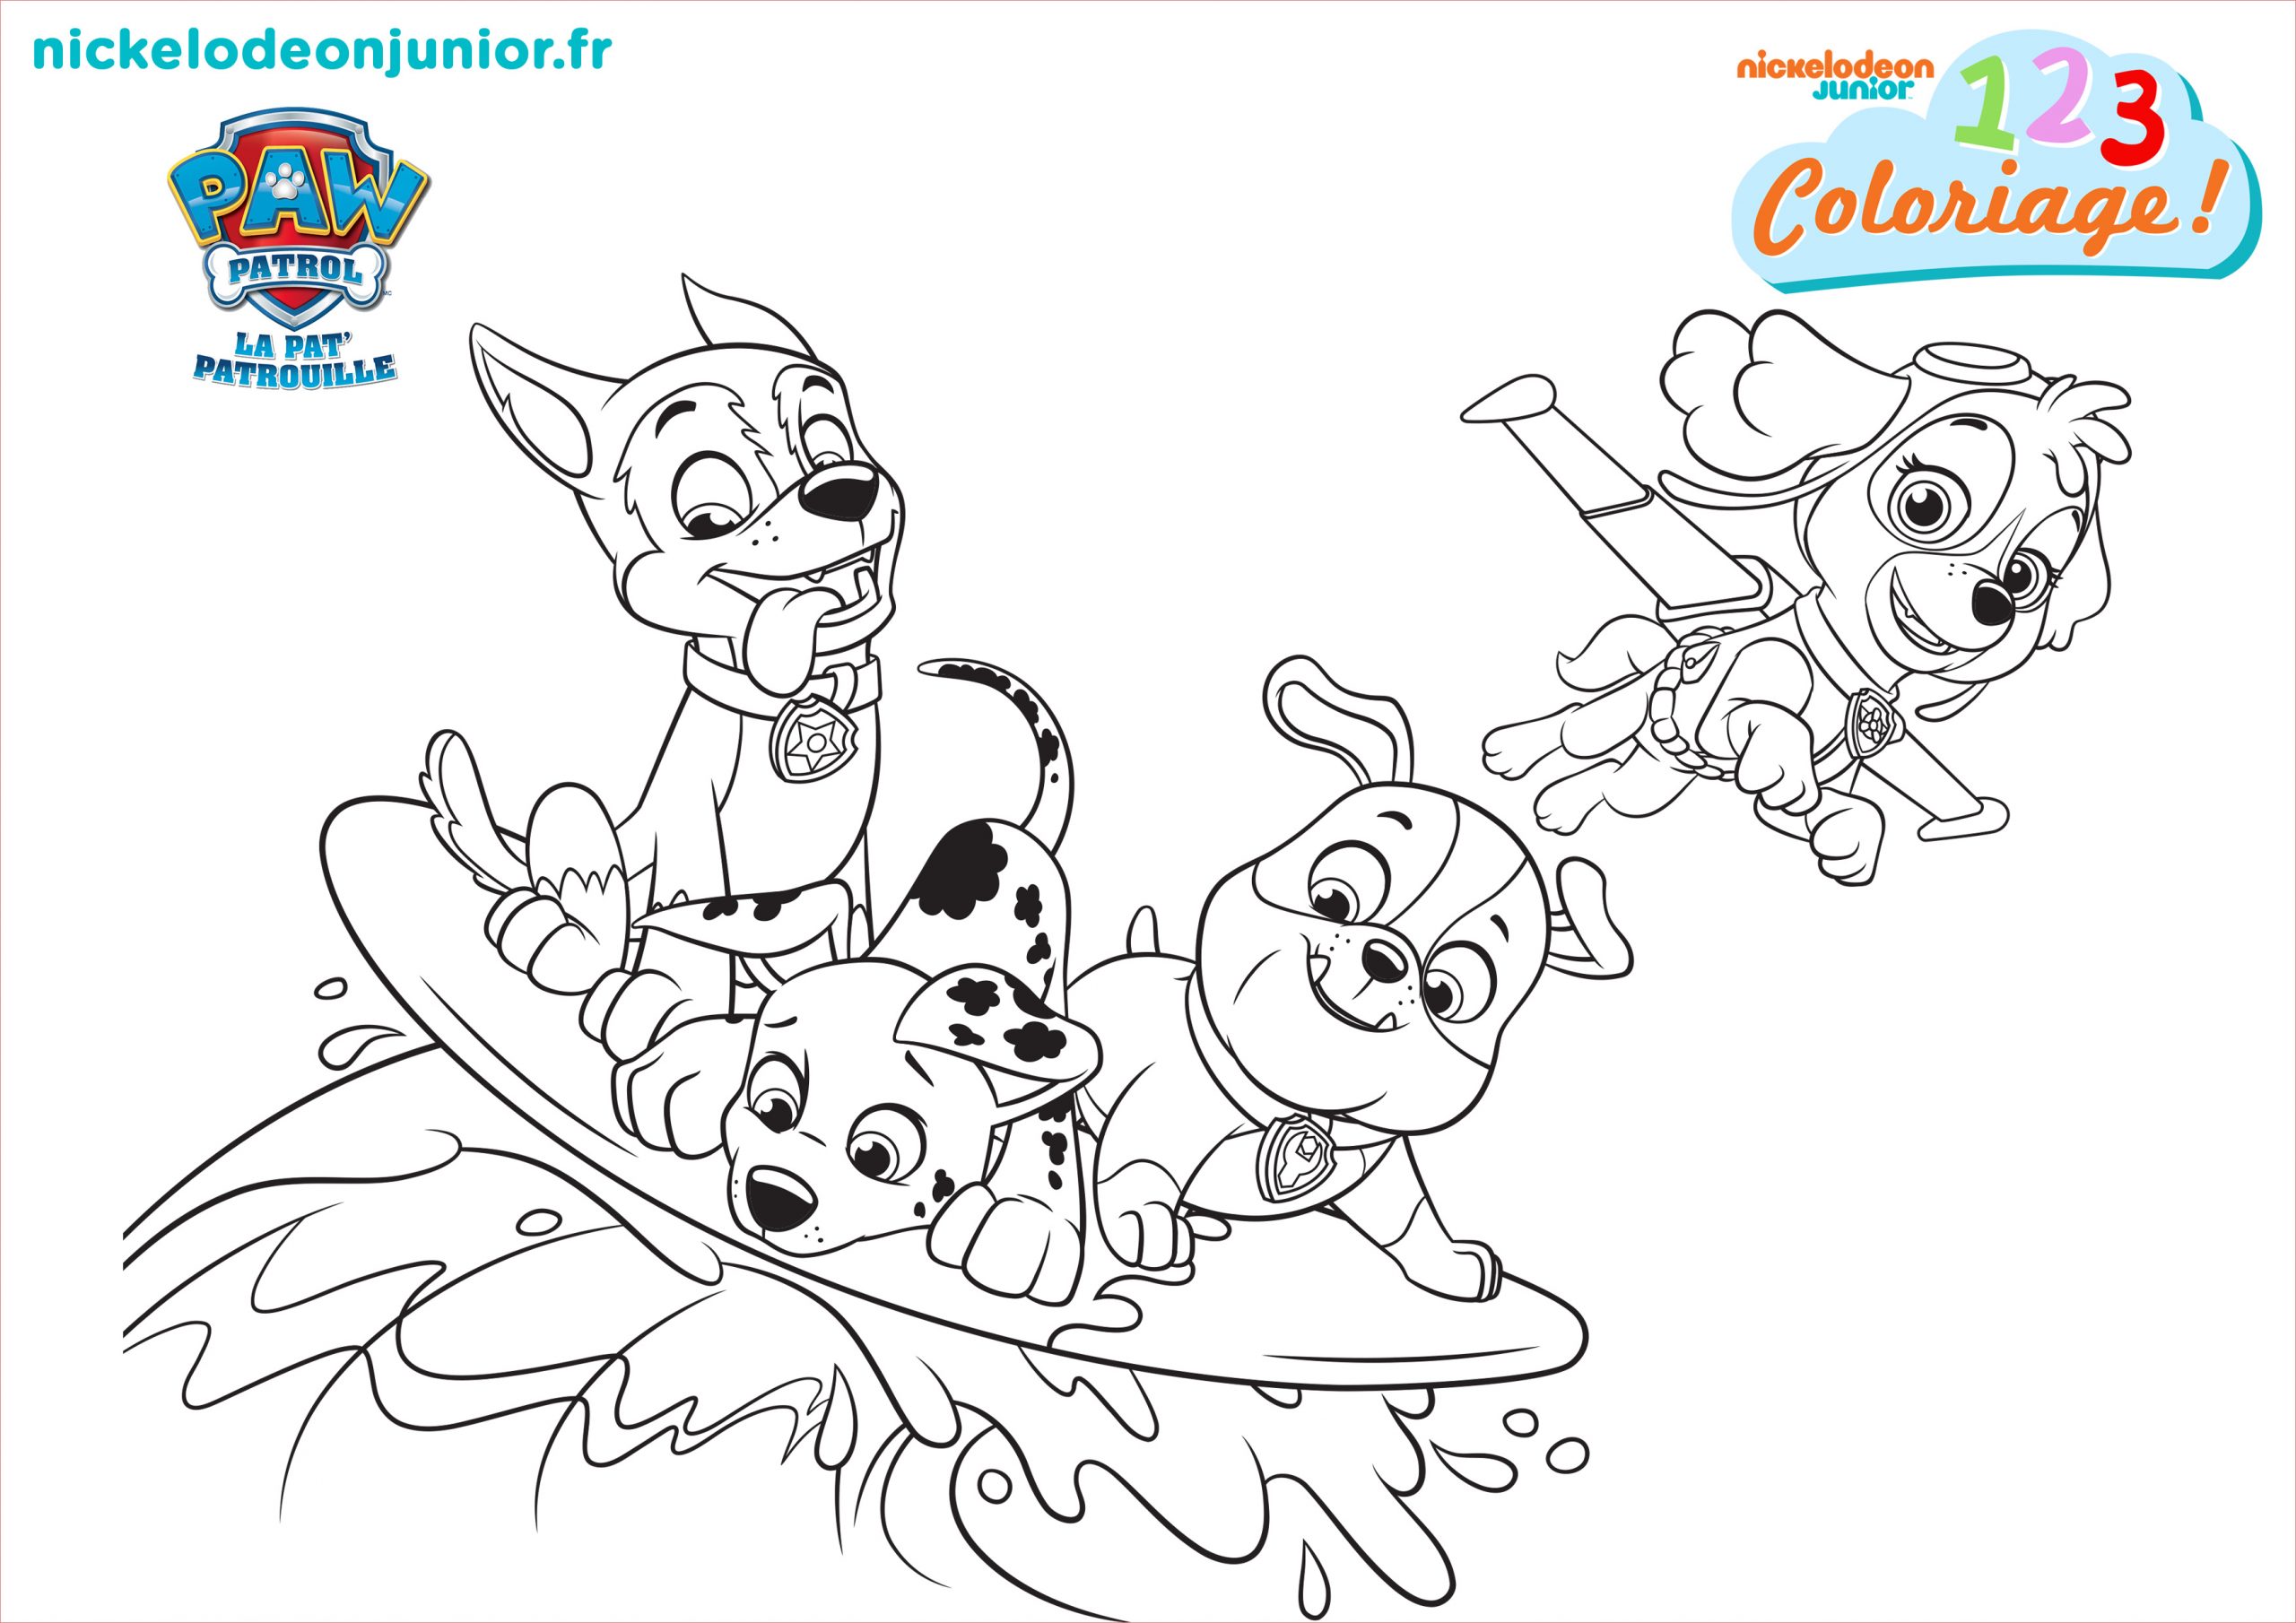 coloriages paw patrol7